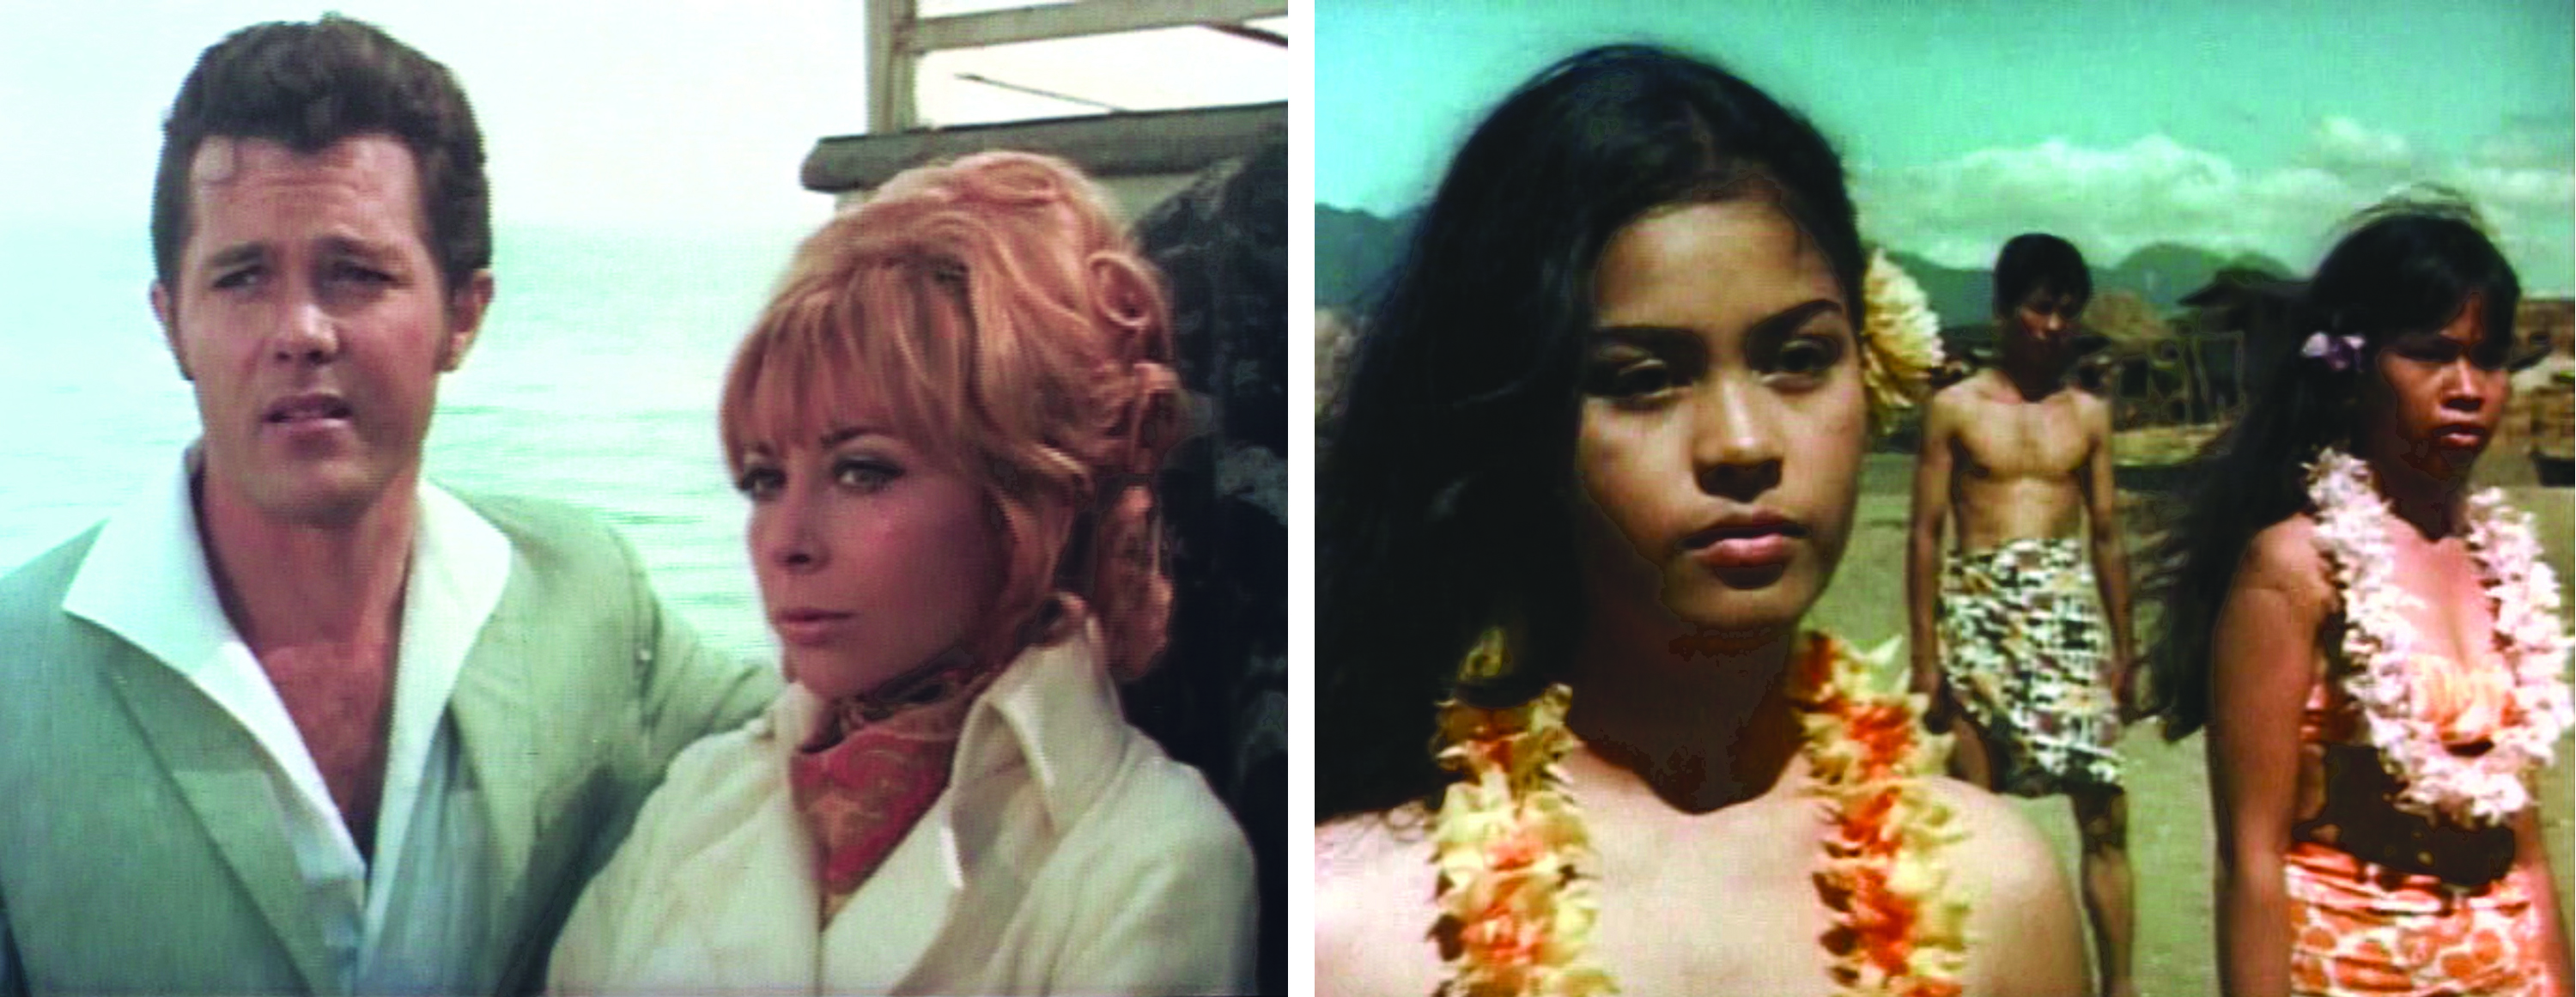 Left: John Ashley and Angelique Pettyjohn approach Blood Island. Right: The welcome wagon.